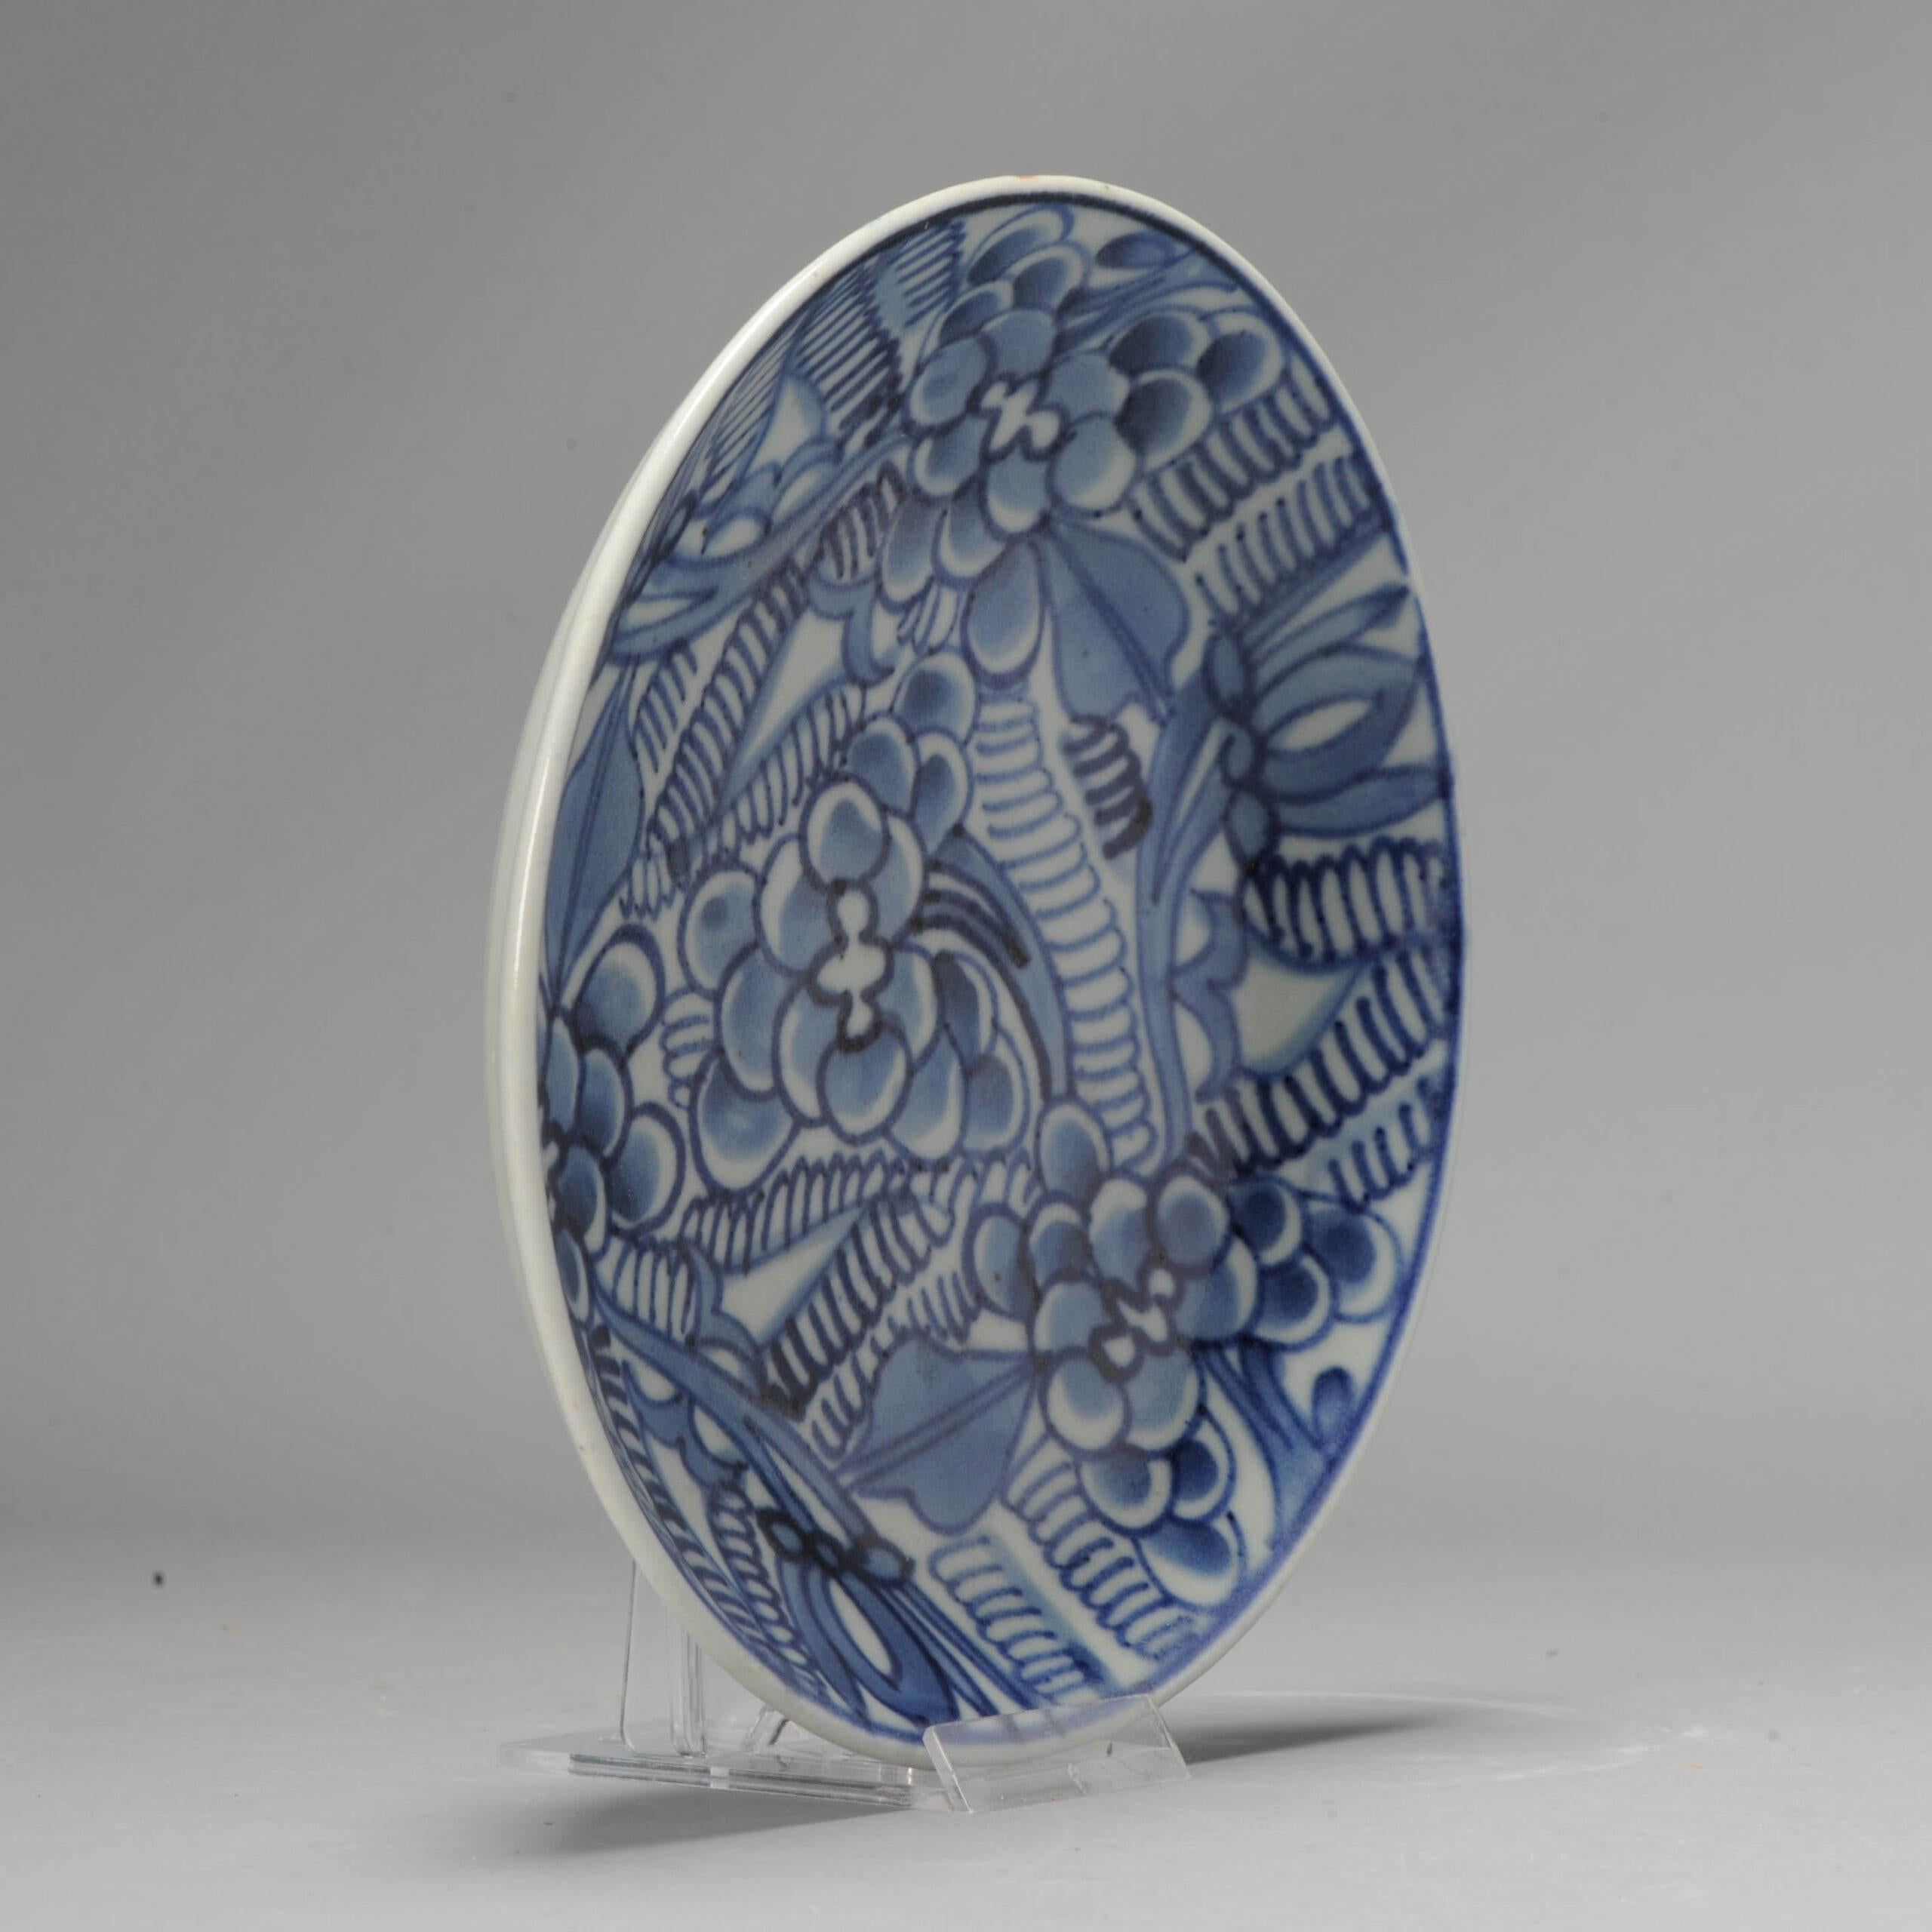 Antique Chinese Porcelain Centur Plate China Antique Kitchen Qing, 19th Century.

Lovely plate.

Additional information:
Material: Porcelain & Pottery
Type: Plates
Emperor: Guangxu (1875-1908)
Region of Origin: China
Period: 19th century Qing (1661